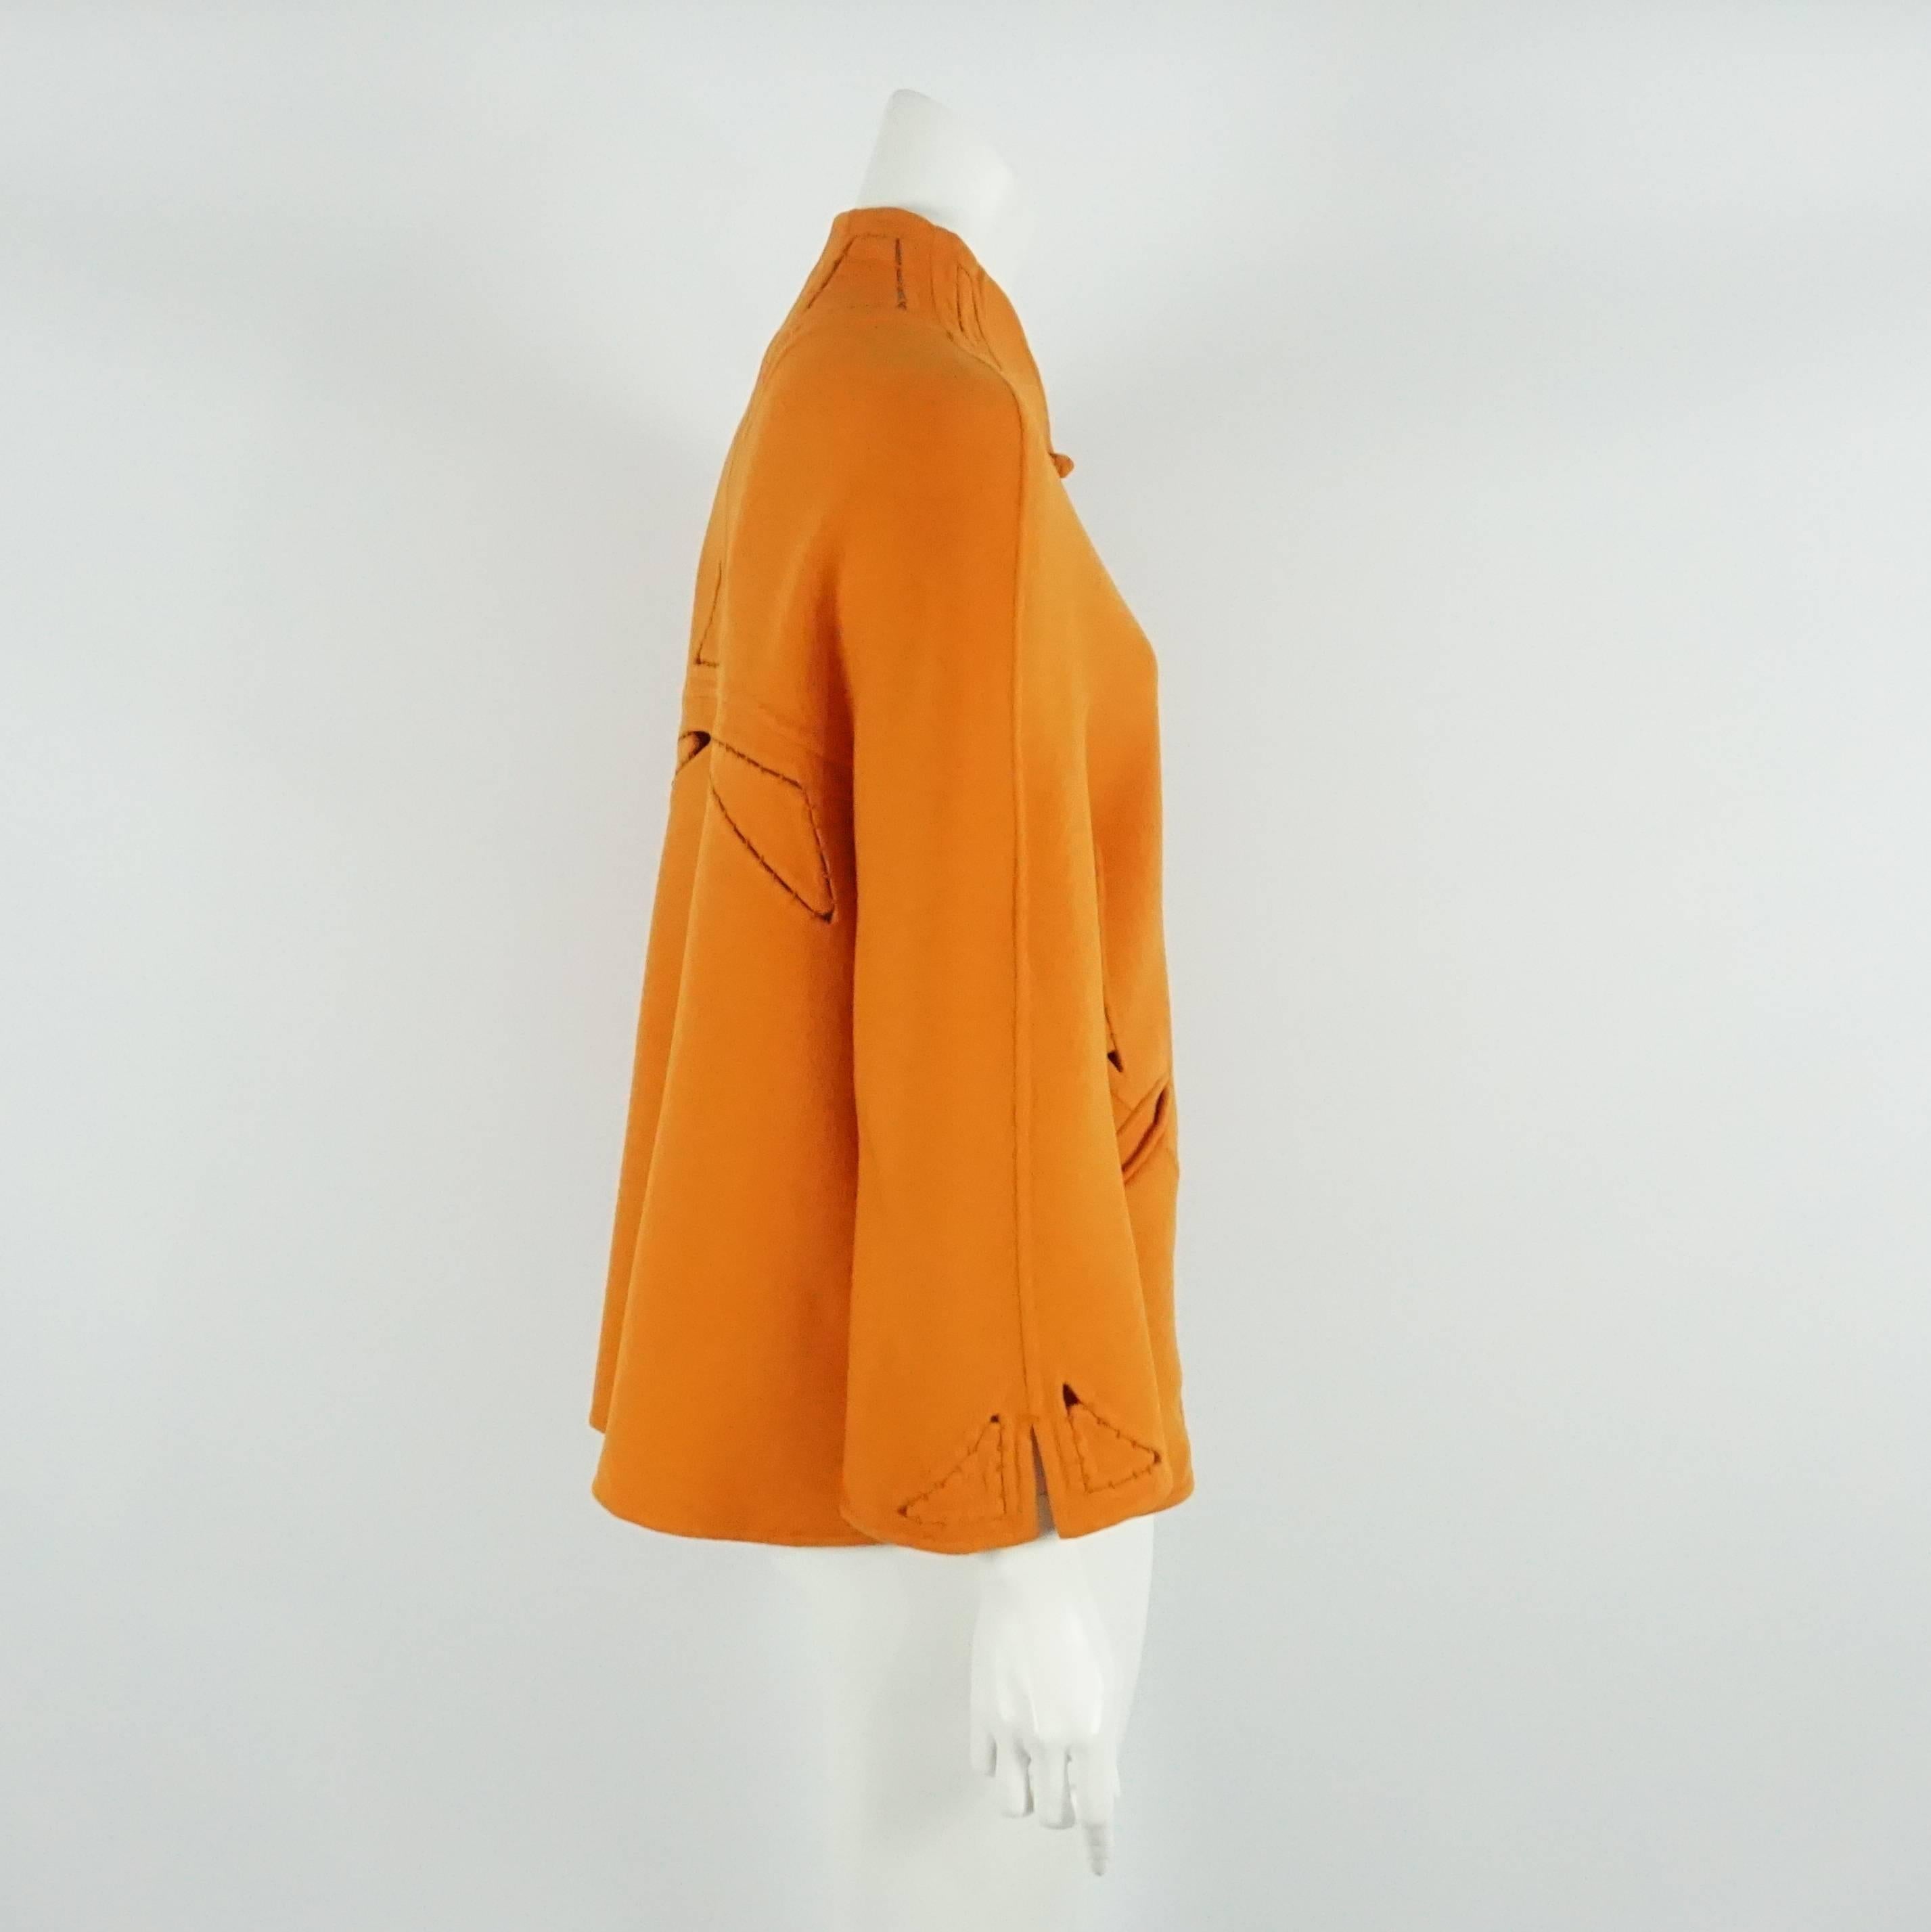 Chado Ralph Rucci Orange Cashmere Cutout Jacket - 6  This fabulous jacket is   made of a thick soft cashmere, with cutouts throughout w/ hand stitching, 2 front pockets, and 6 front buttons. This jacket is in excellent